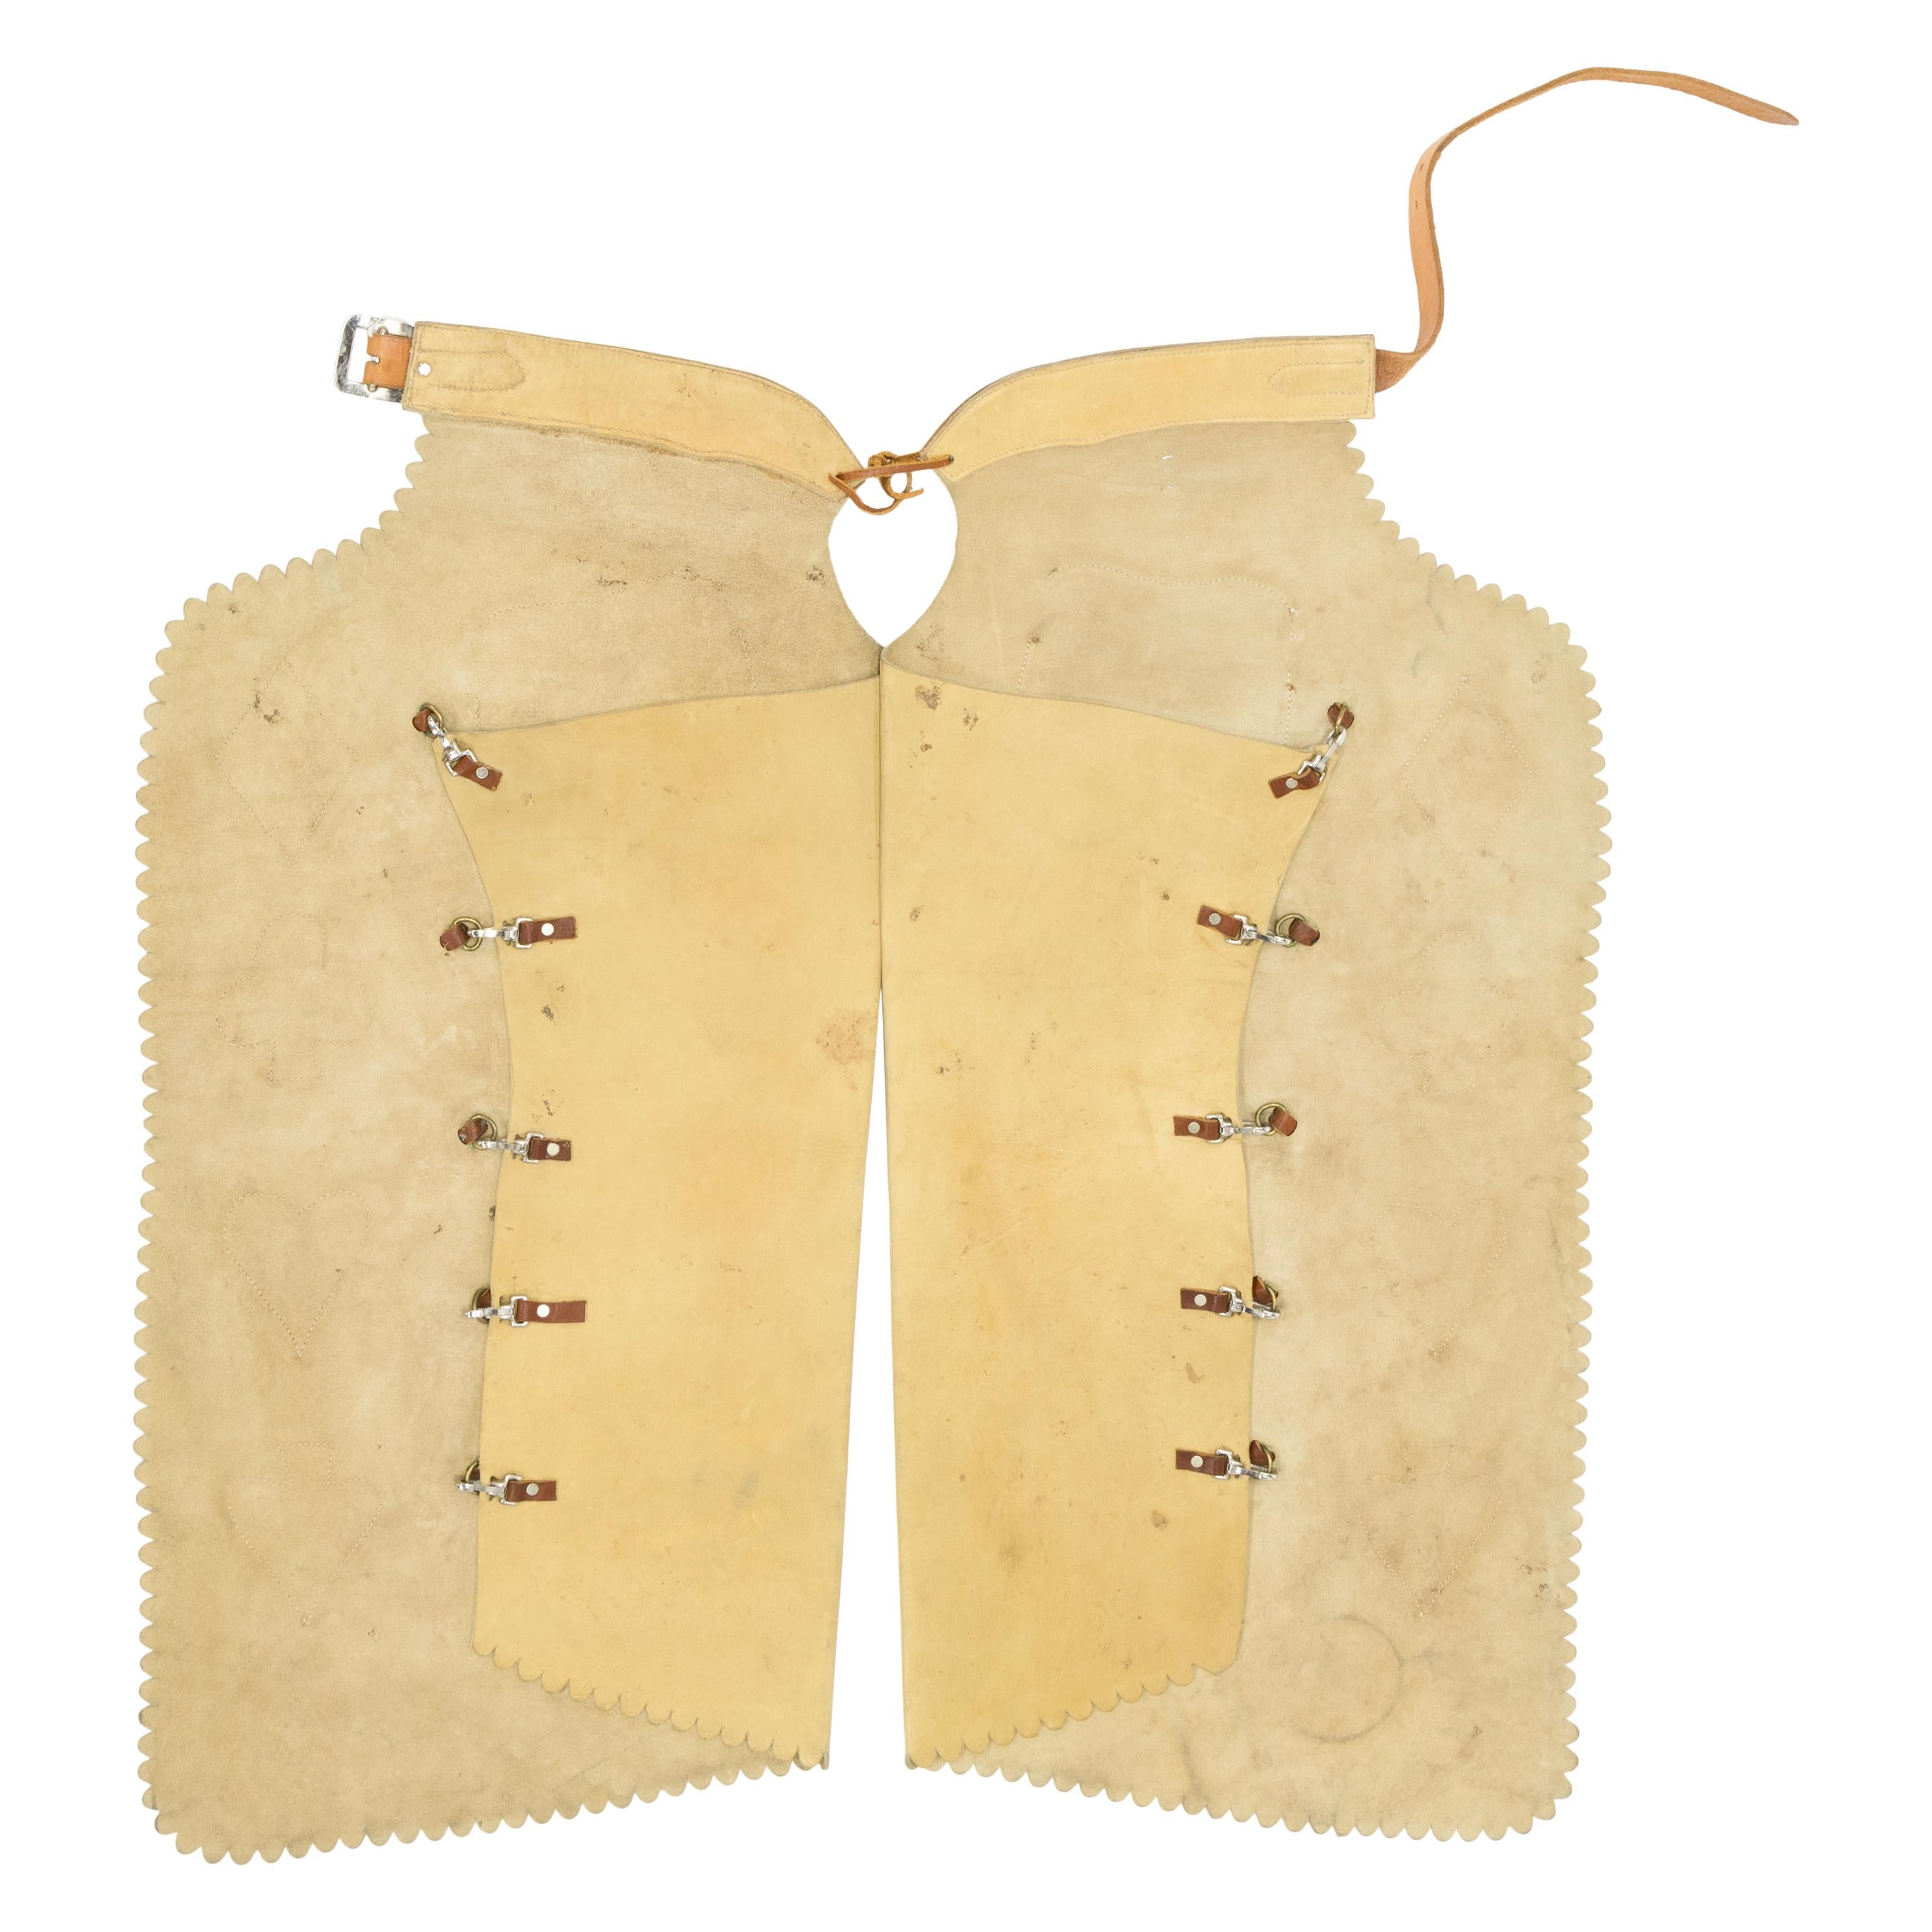 Vintage batwing chaps with outside pockets, leather conchos and basketweave belt. Leather is a light, beige color with warm, natural brown pockets, decorative card suits, and concohs. Unmarked, with C11 on lower left corner. Would display nicely in